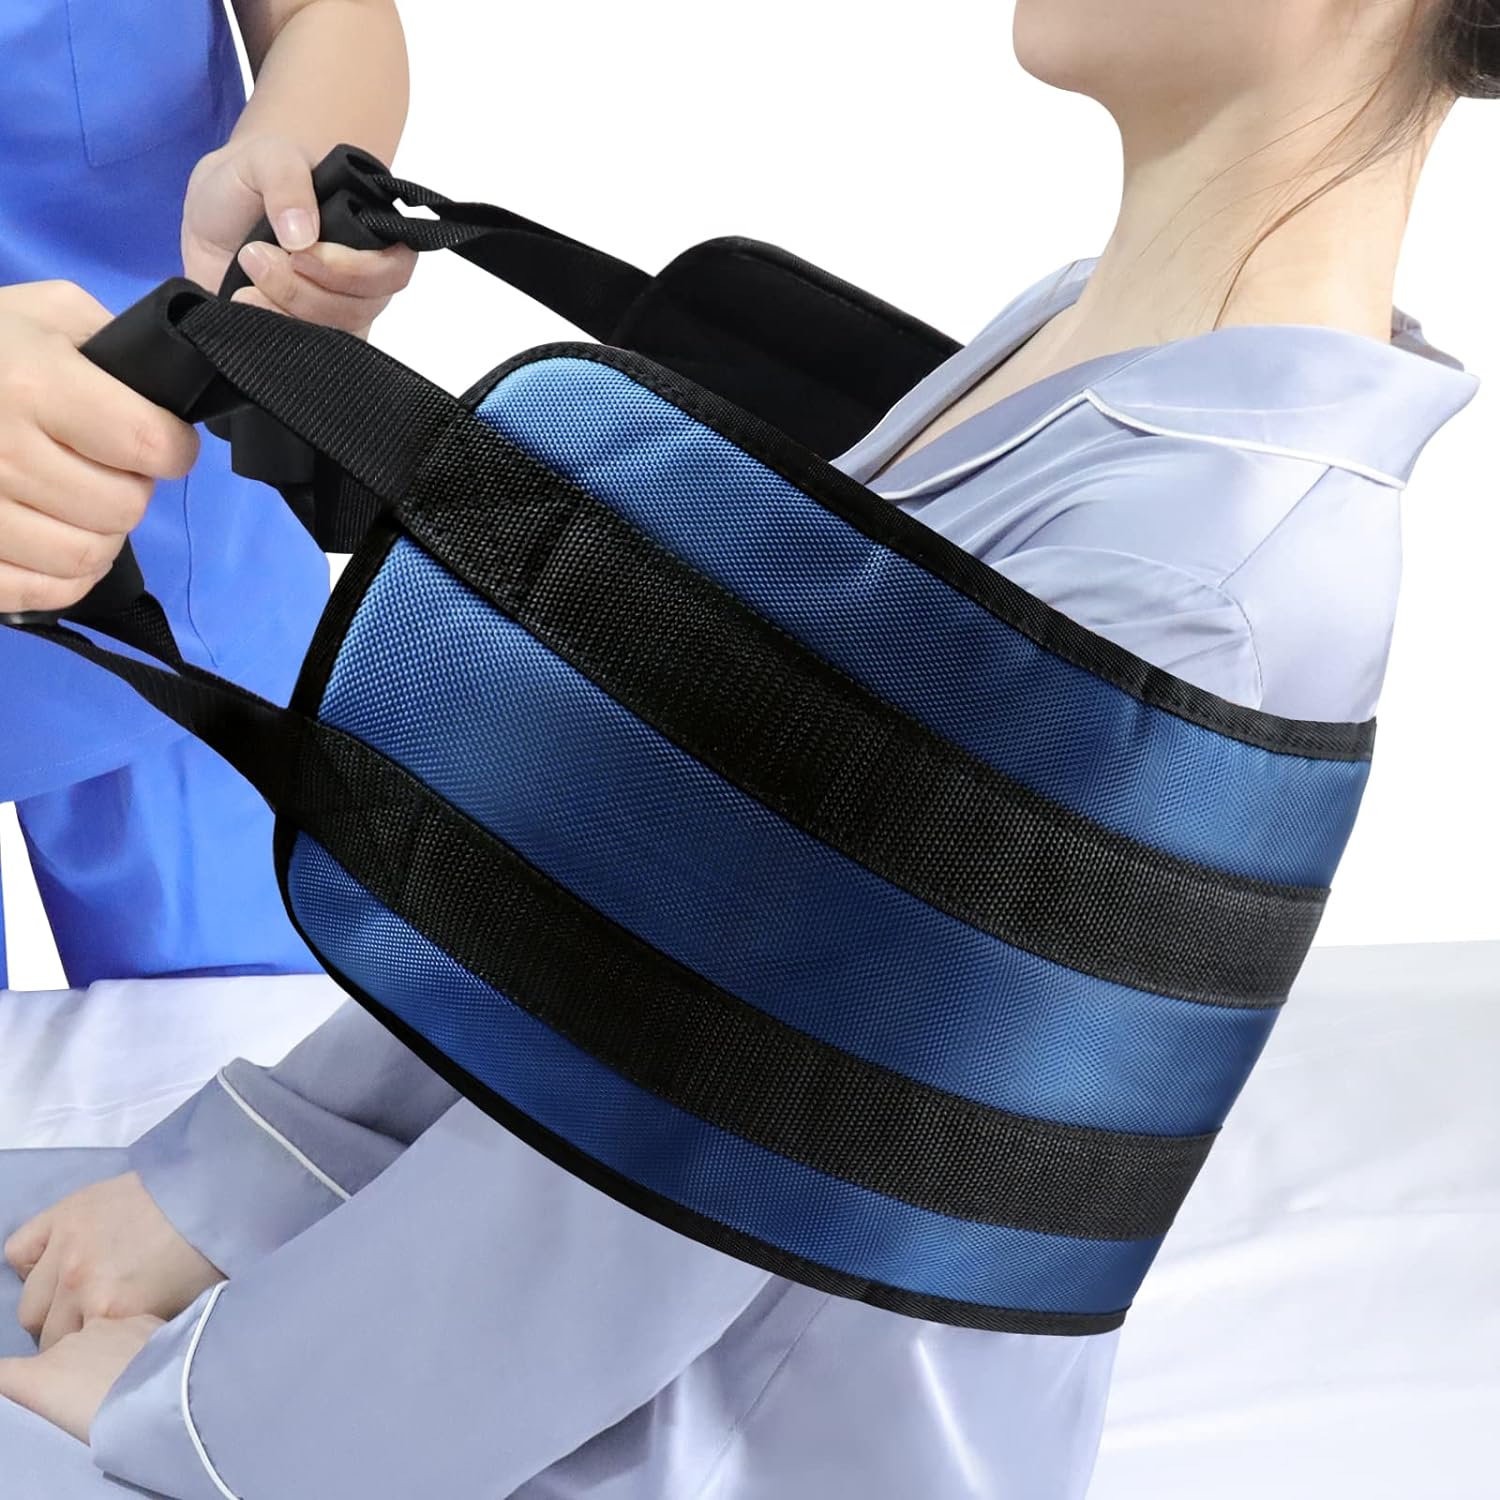 Padded Bed Transfer Nursing Sling for Patient, Elderly Safety Lifting Aids  - Helia Beer Co